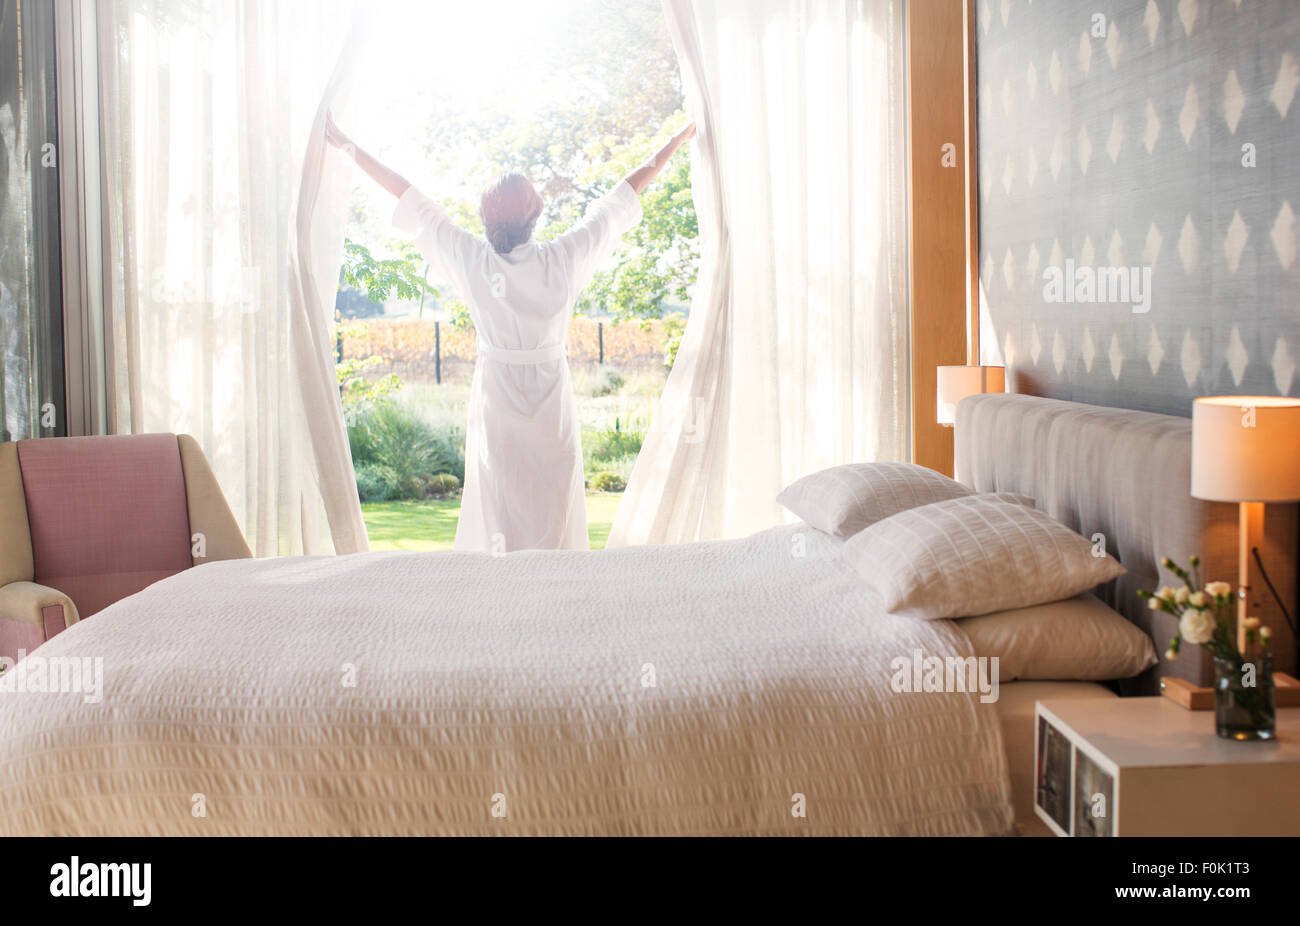 Woman in bathrobe opening bedroom curtains Stock Photo